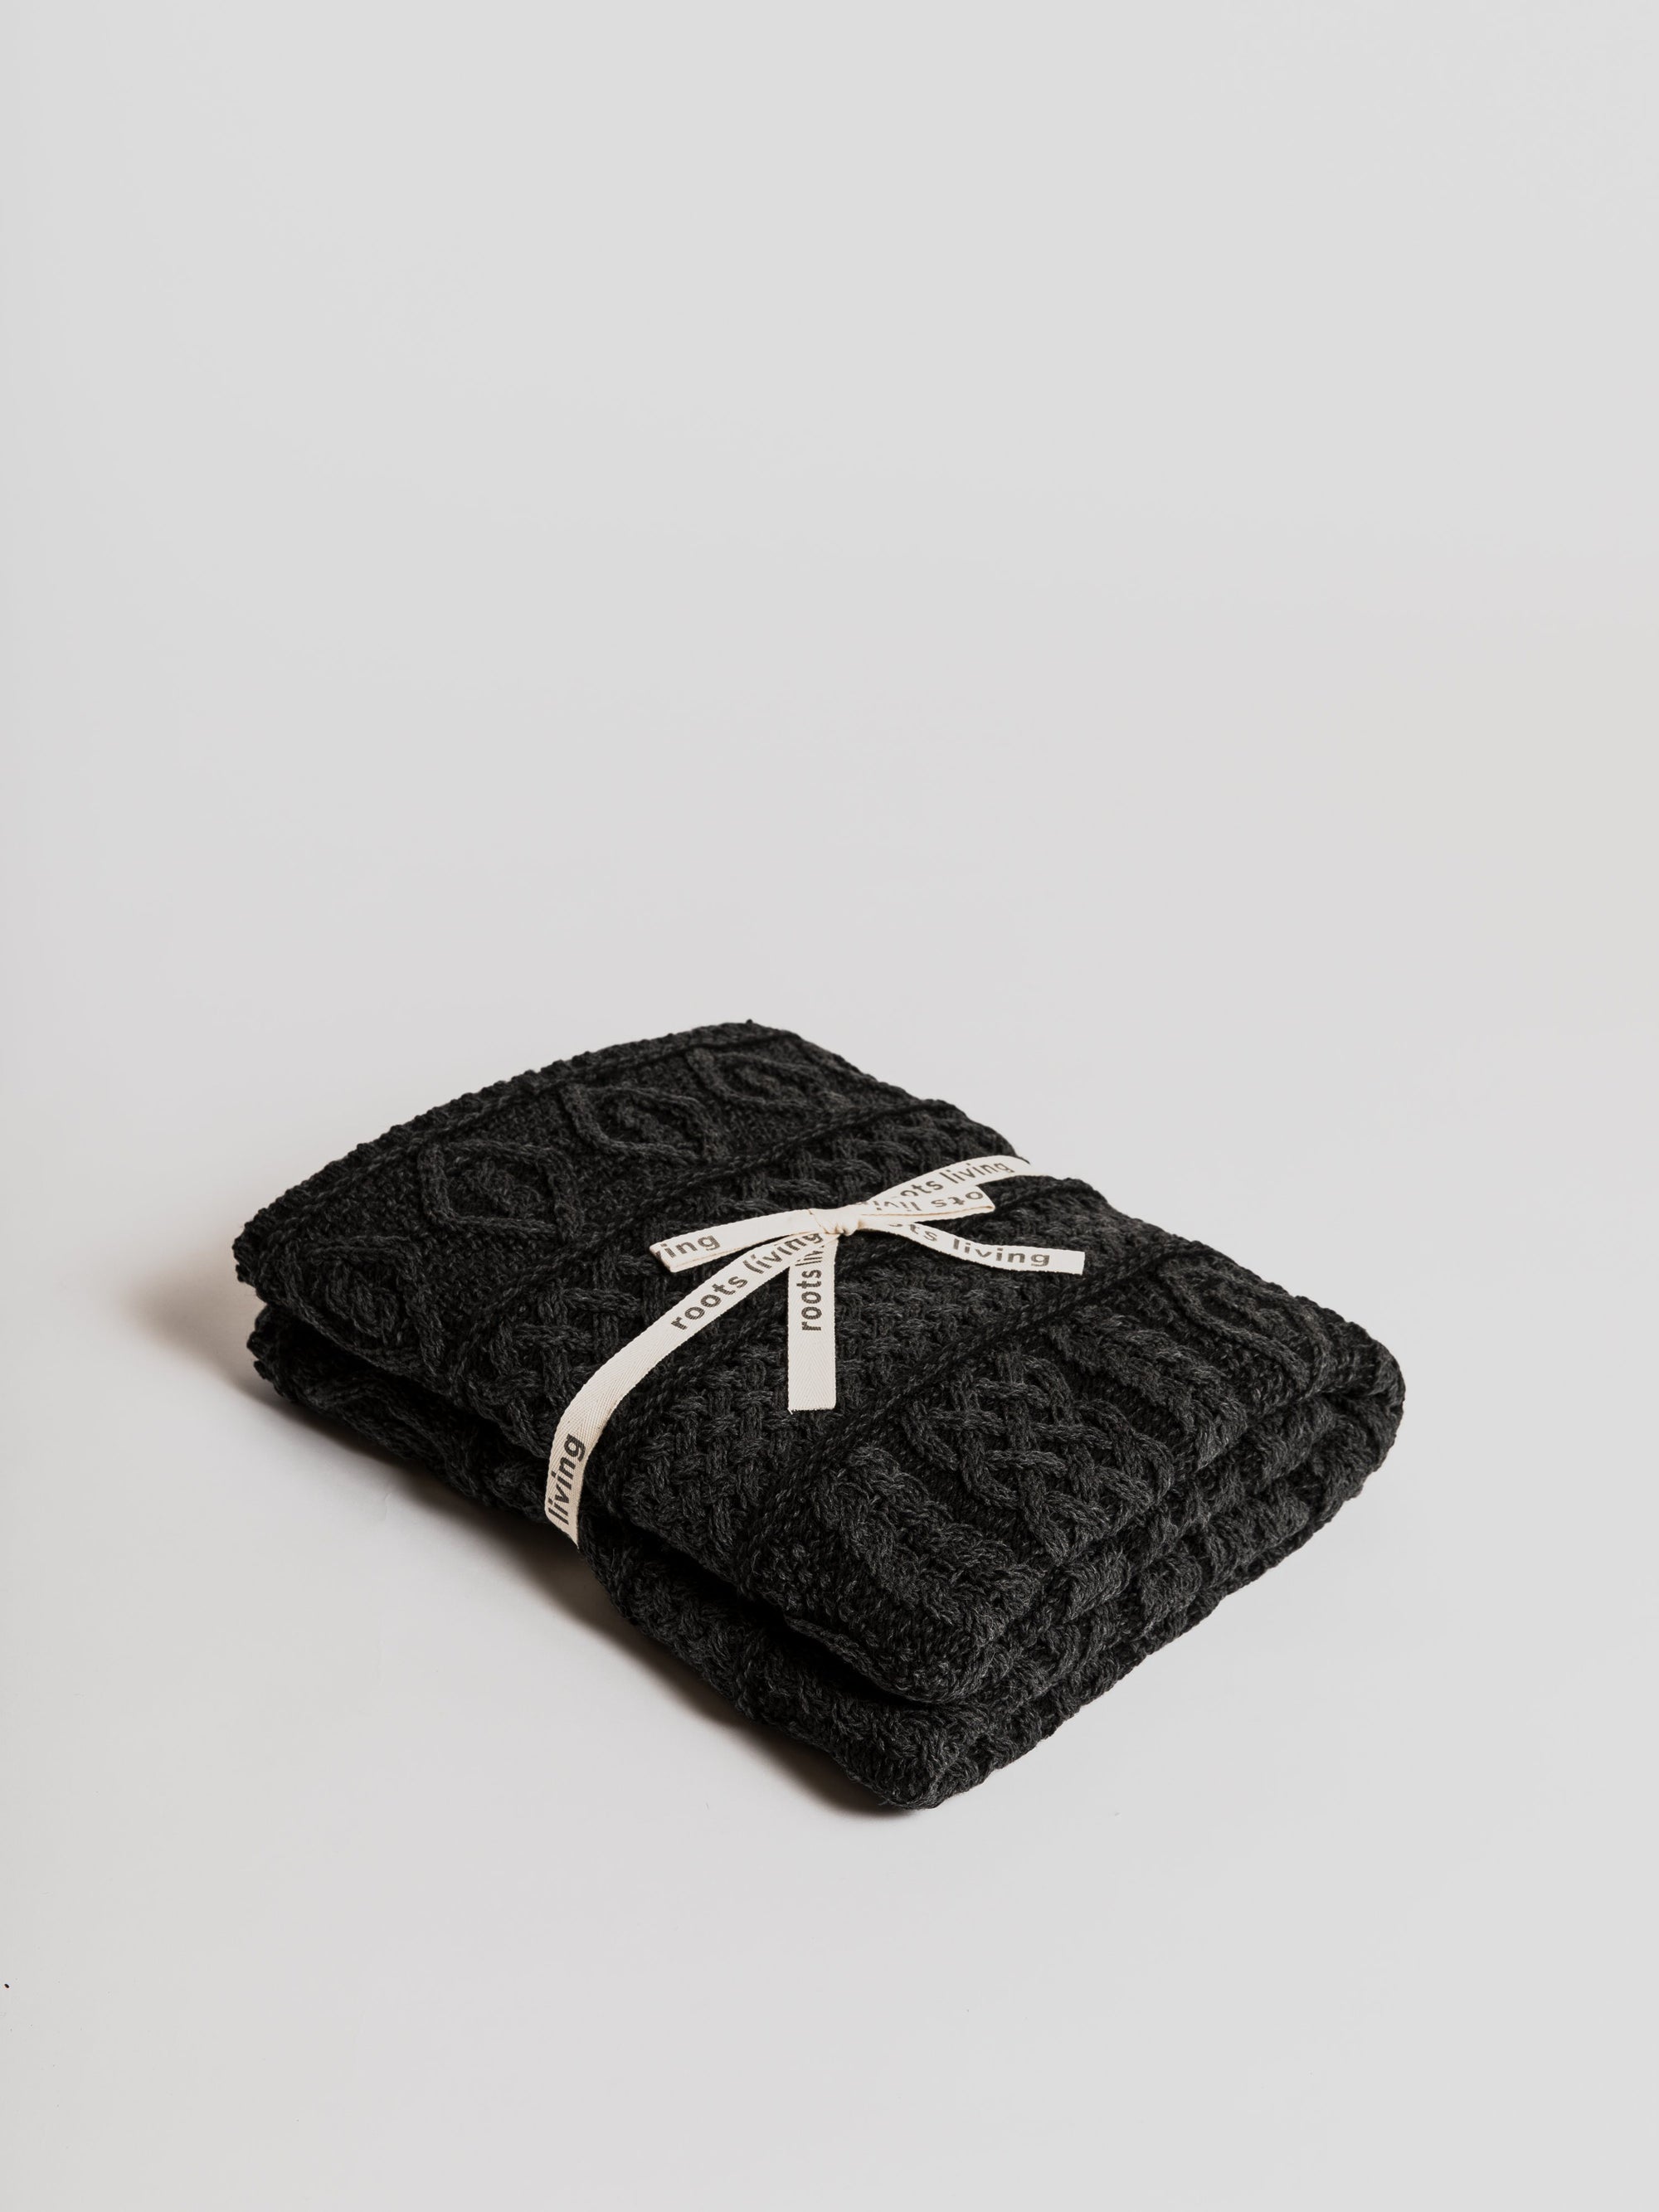 Knitted Wool Throw - Black Blanket Roots Living 